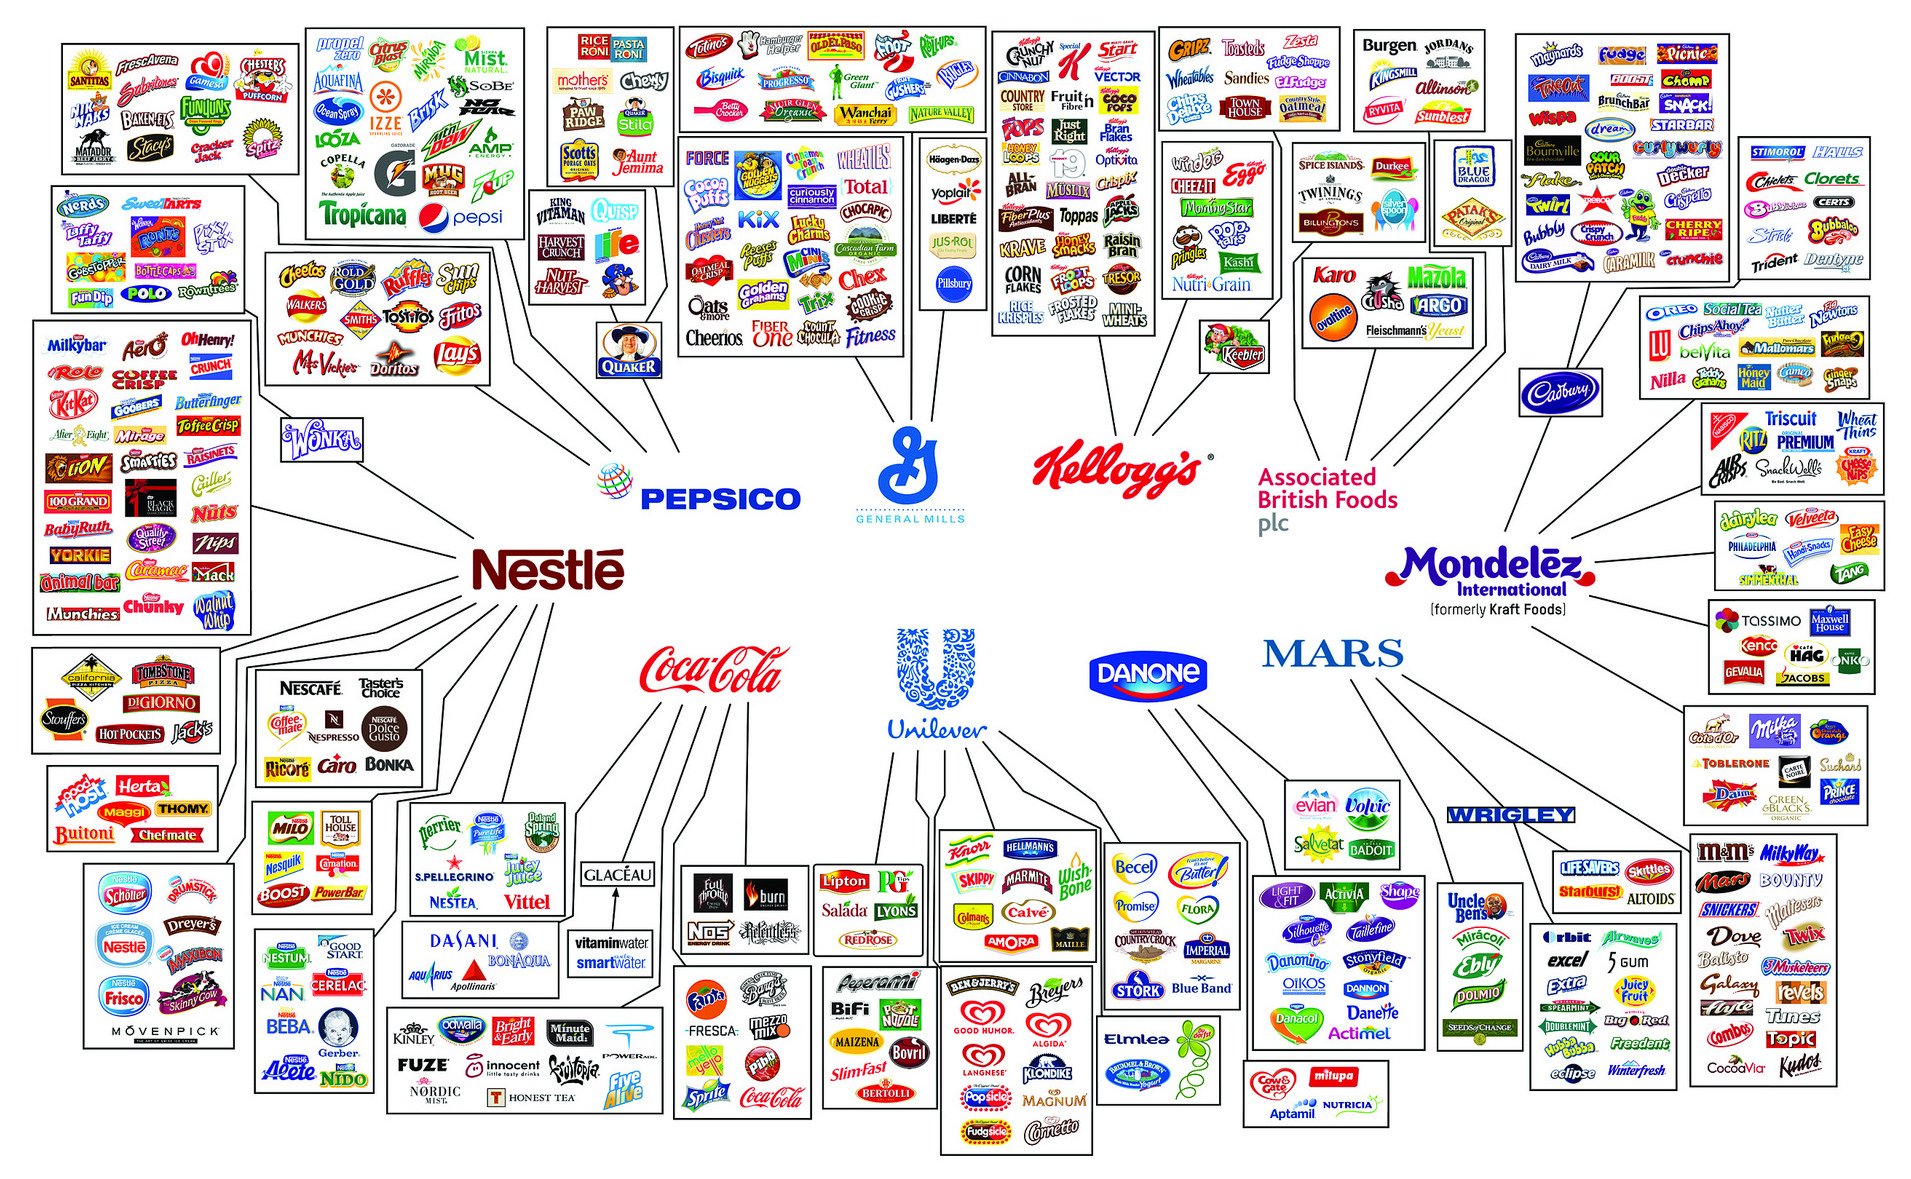 The illusion of choice with consumer brands